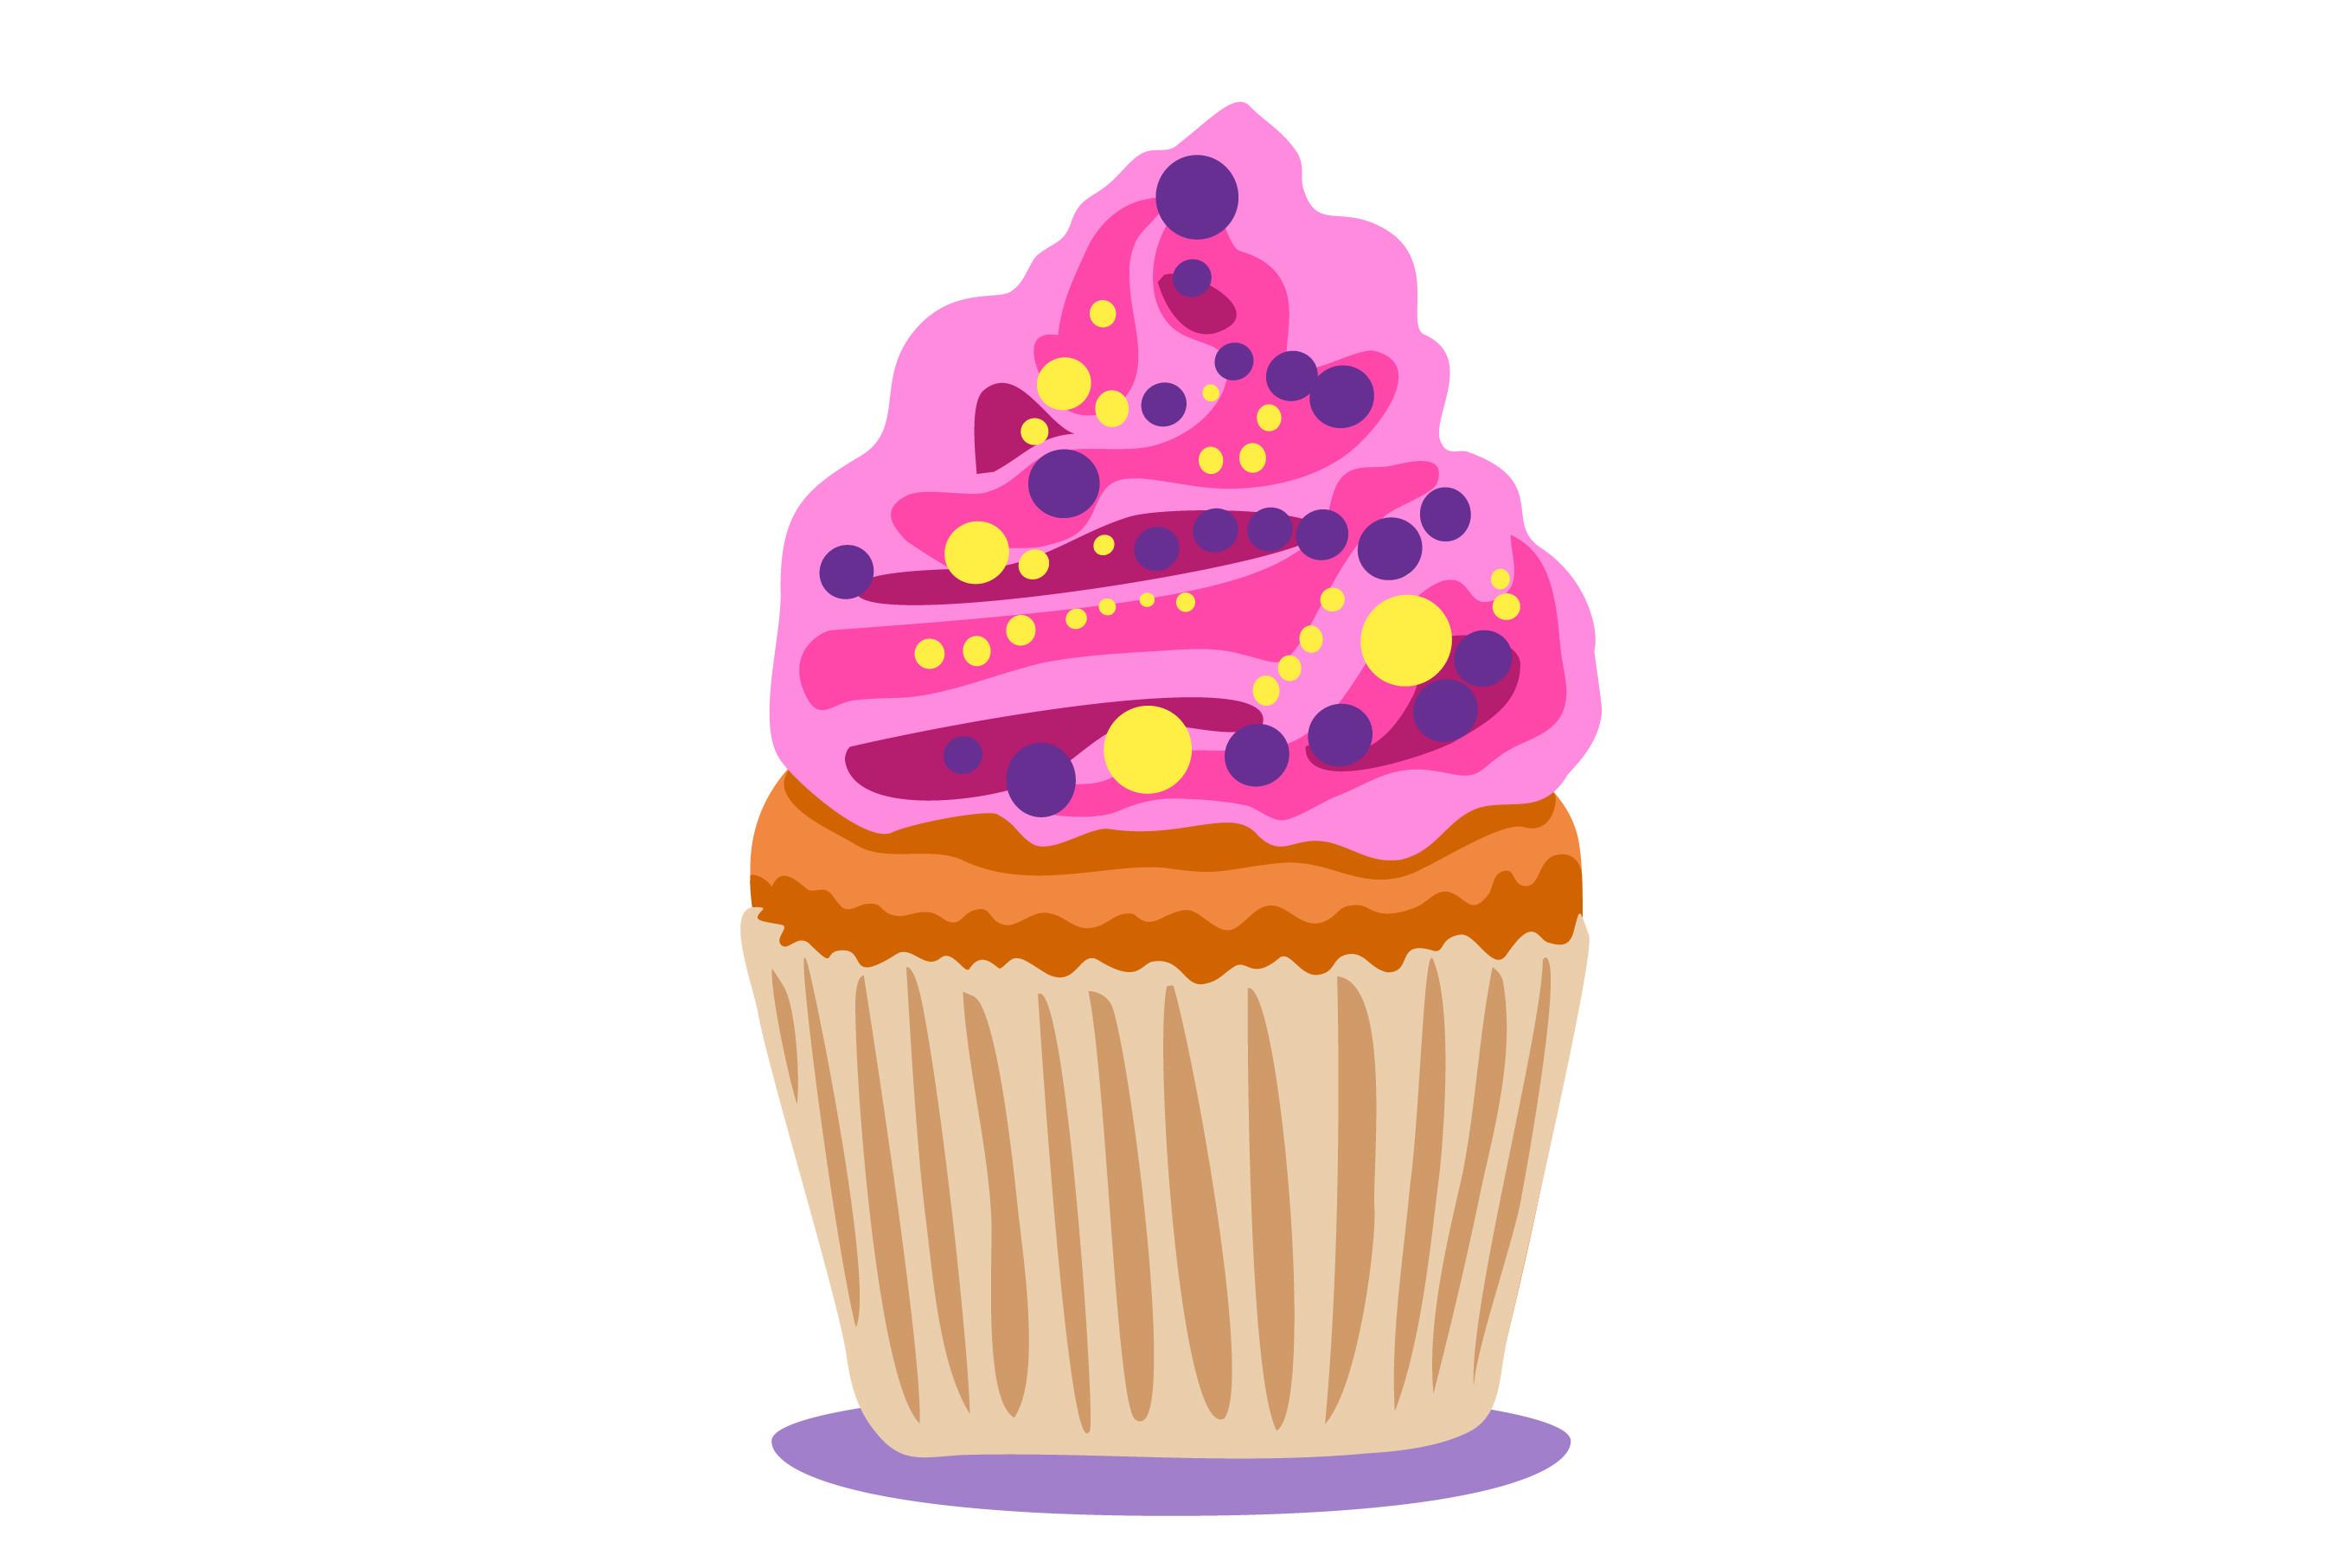 Cartoon Pink Cupcake Isolated on White